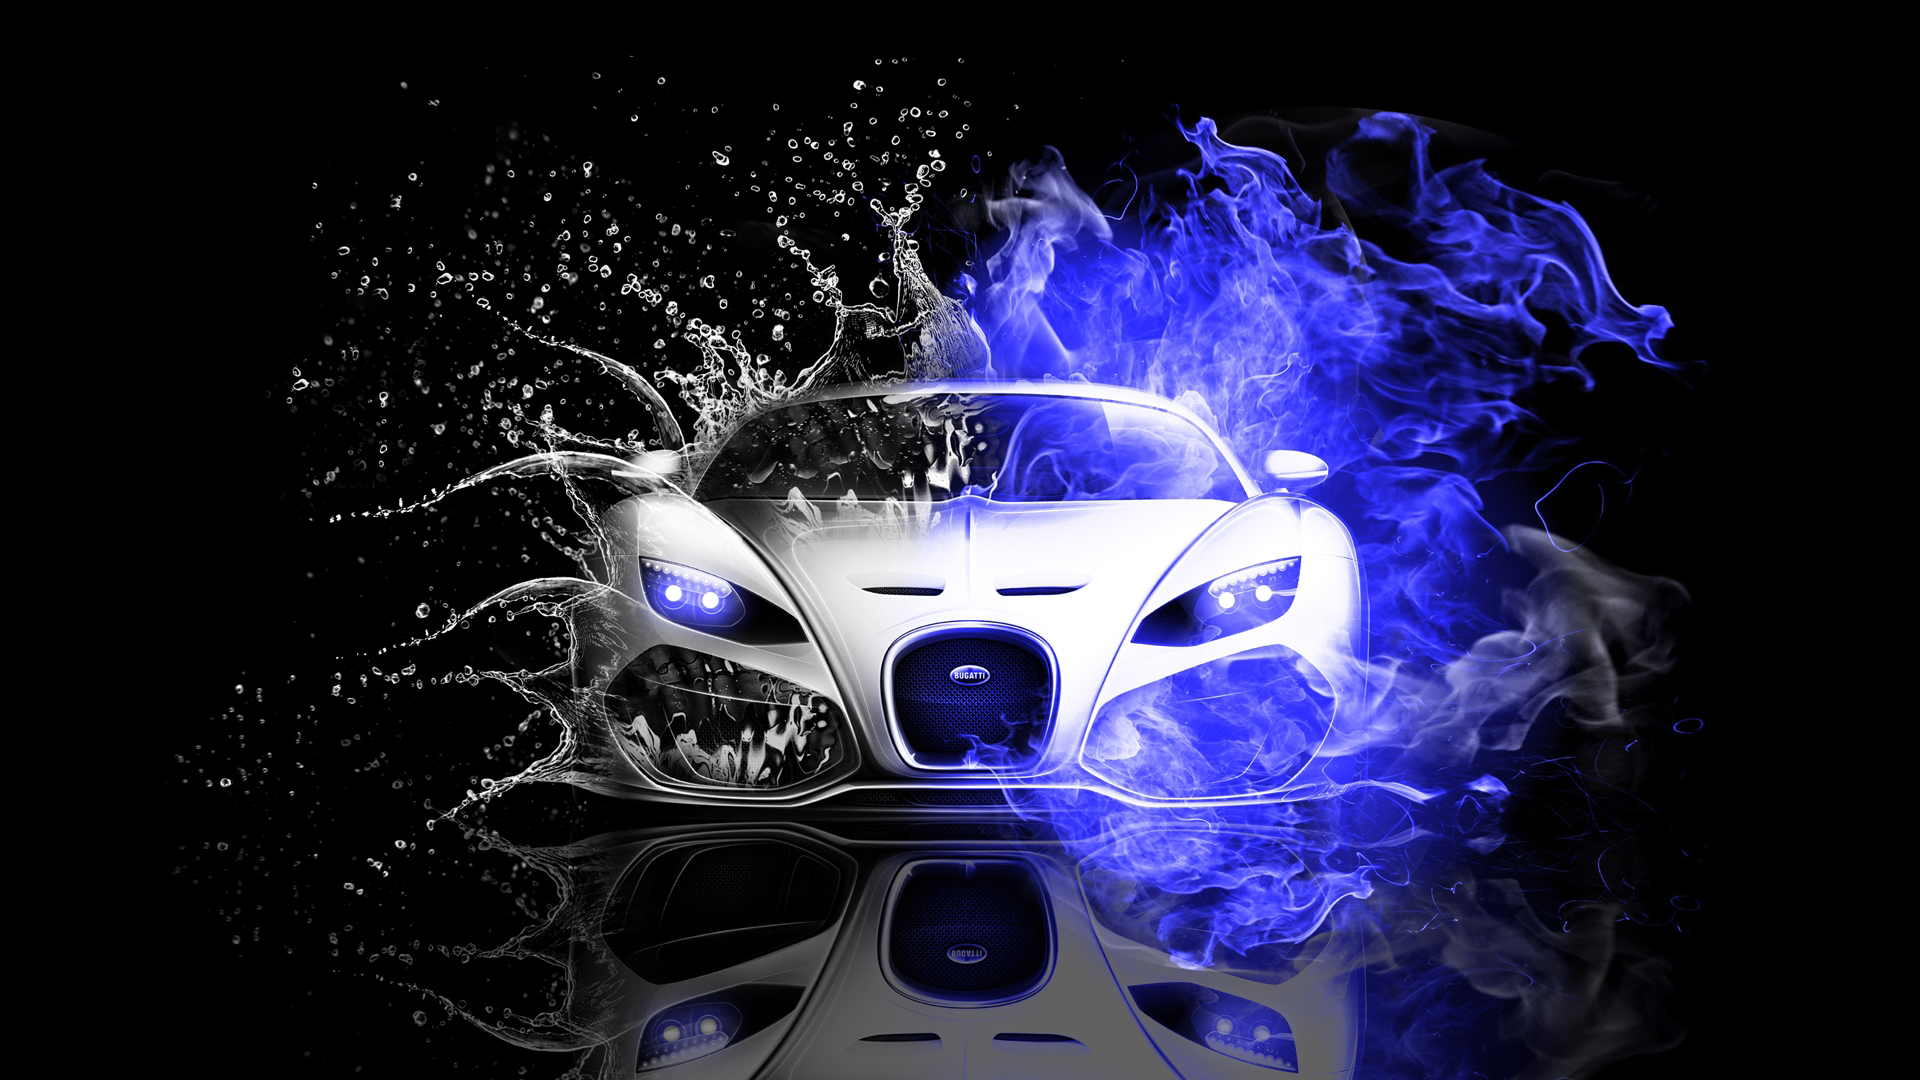 Awesome Water Fire Car HD Wallpaper 1080p